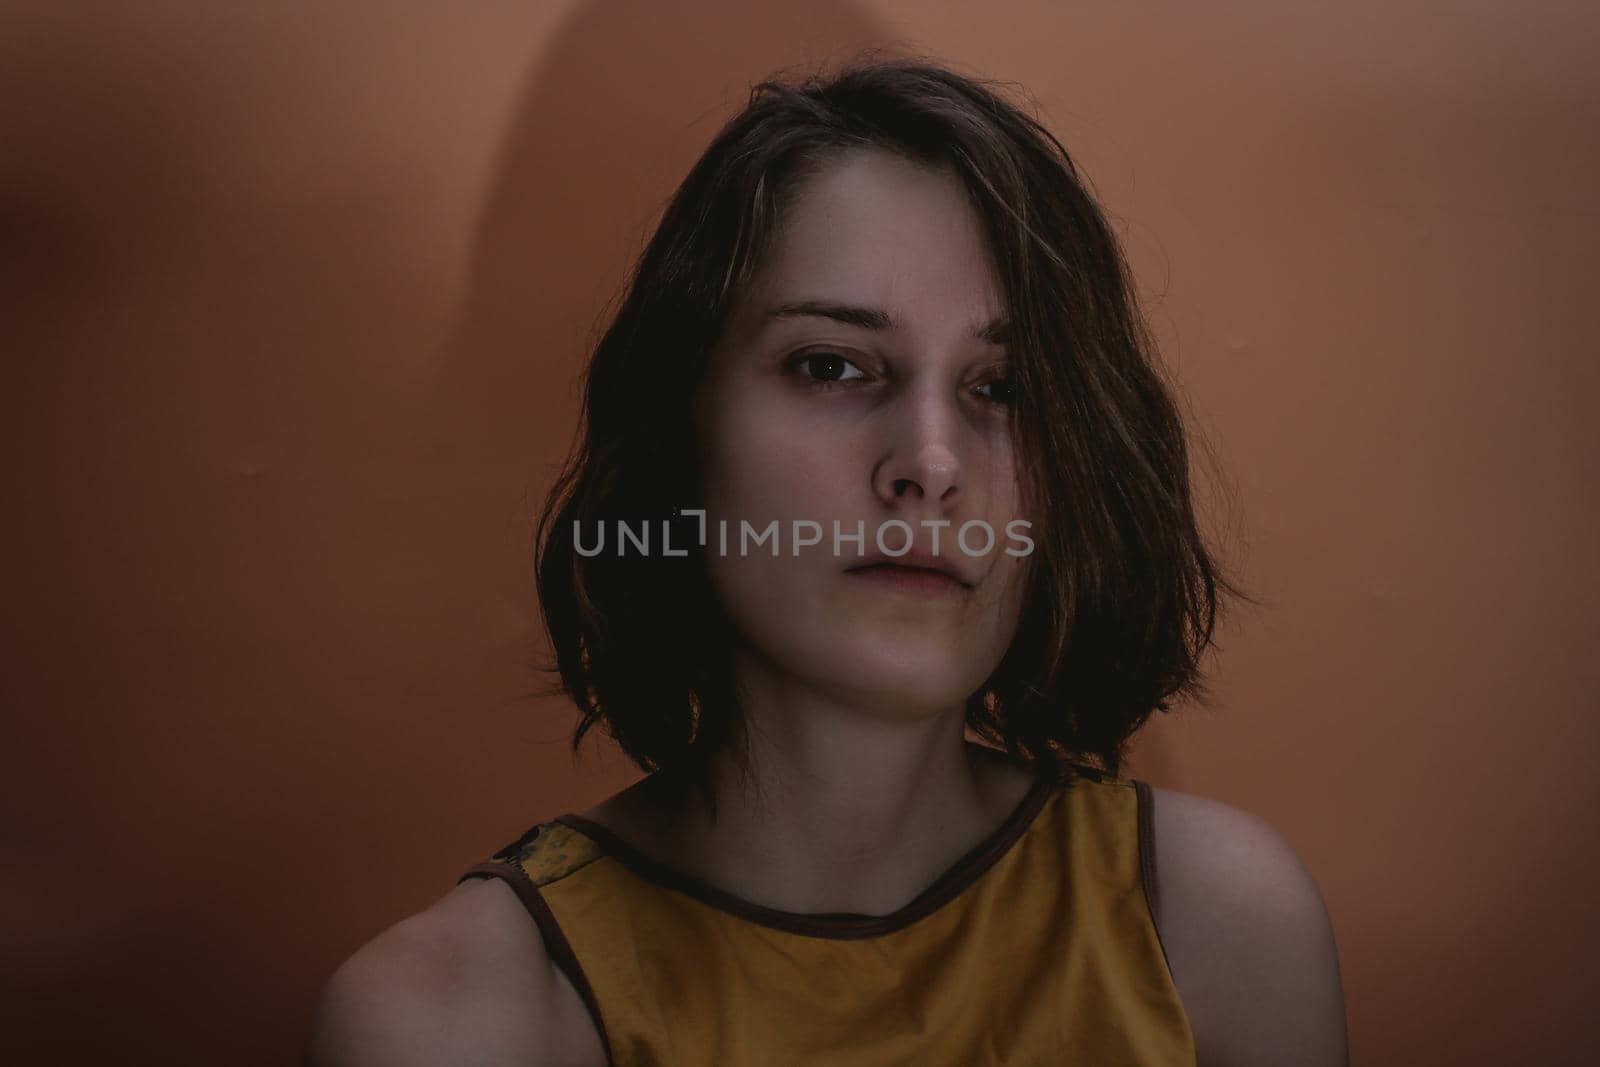 Dark portrait of serious young woman